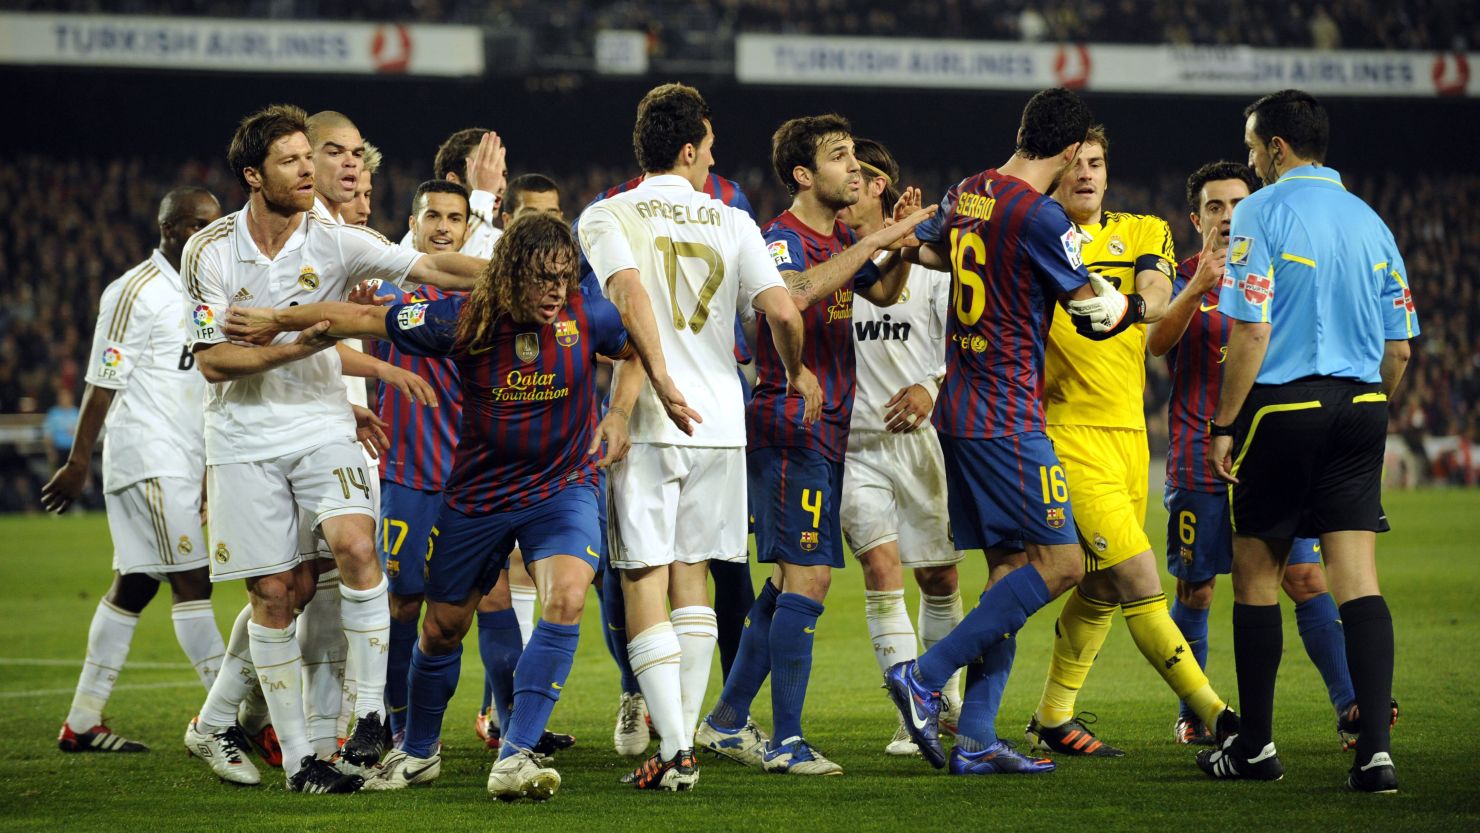 Clashes between fierce Spanish rivals Real Madrid and Barcelona are always a feisty affair